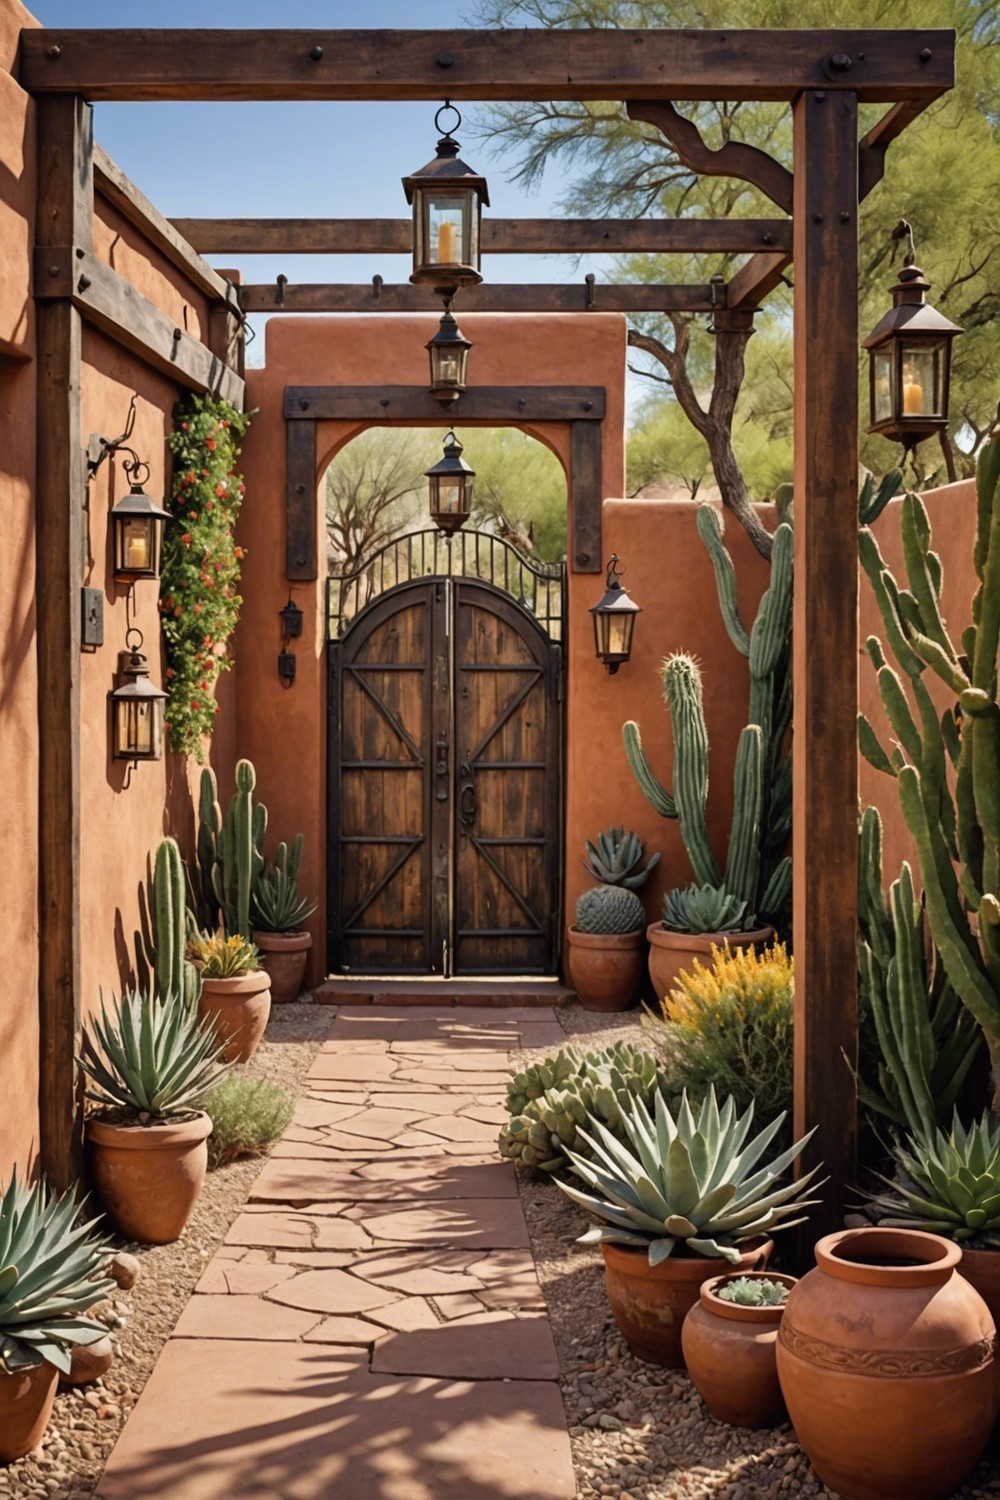 Desert Landscaping with a Southwestern Flair